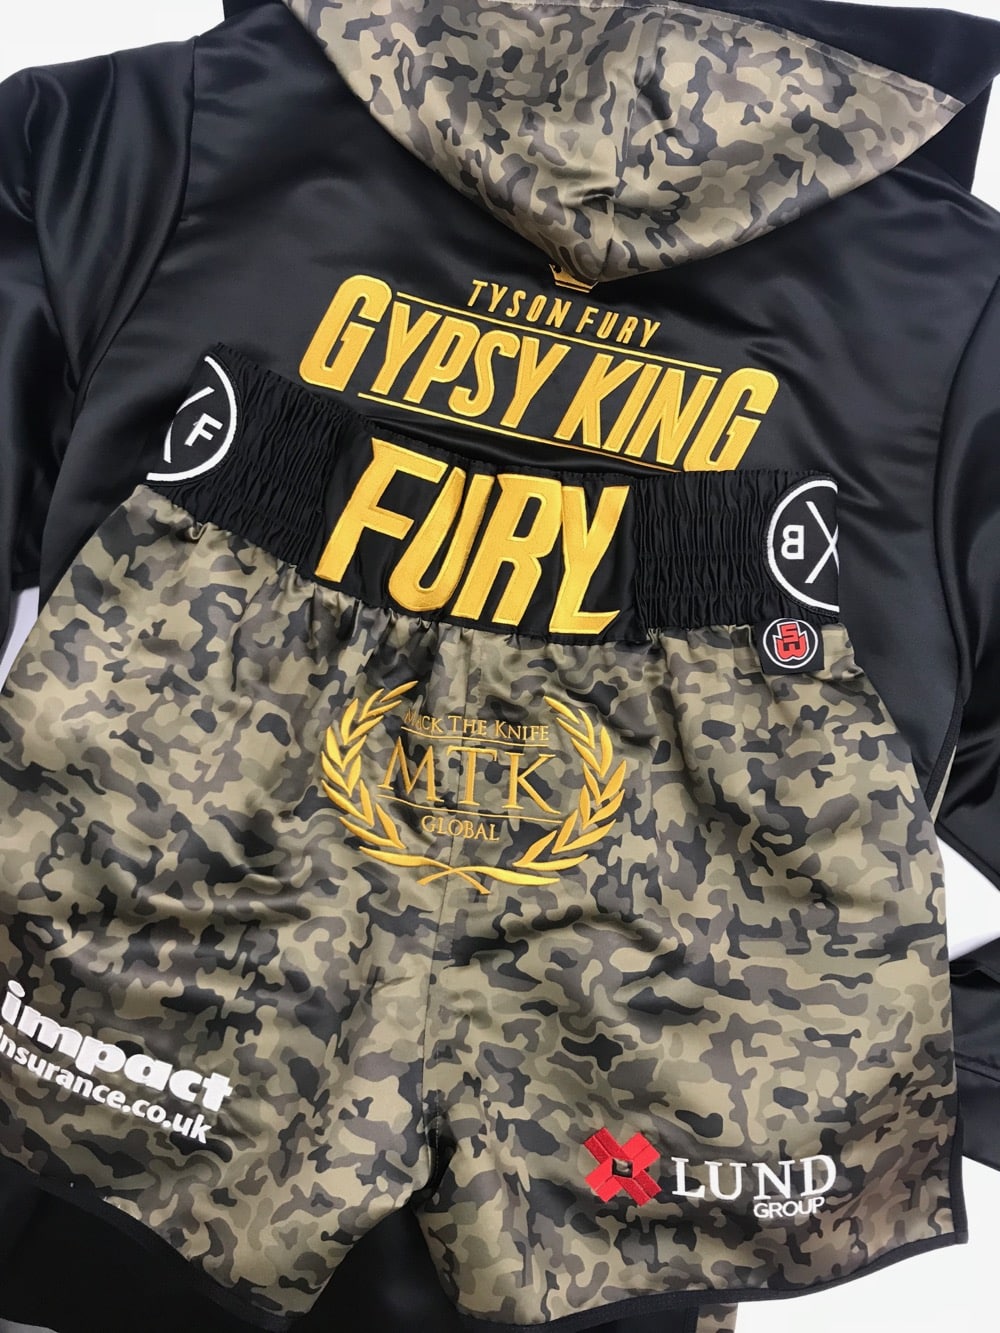 tyson fury boxing shorts and gown